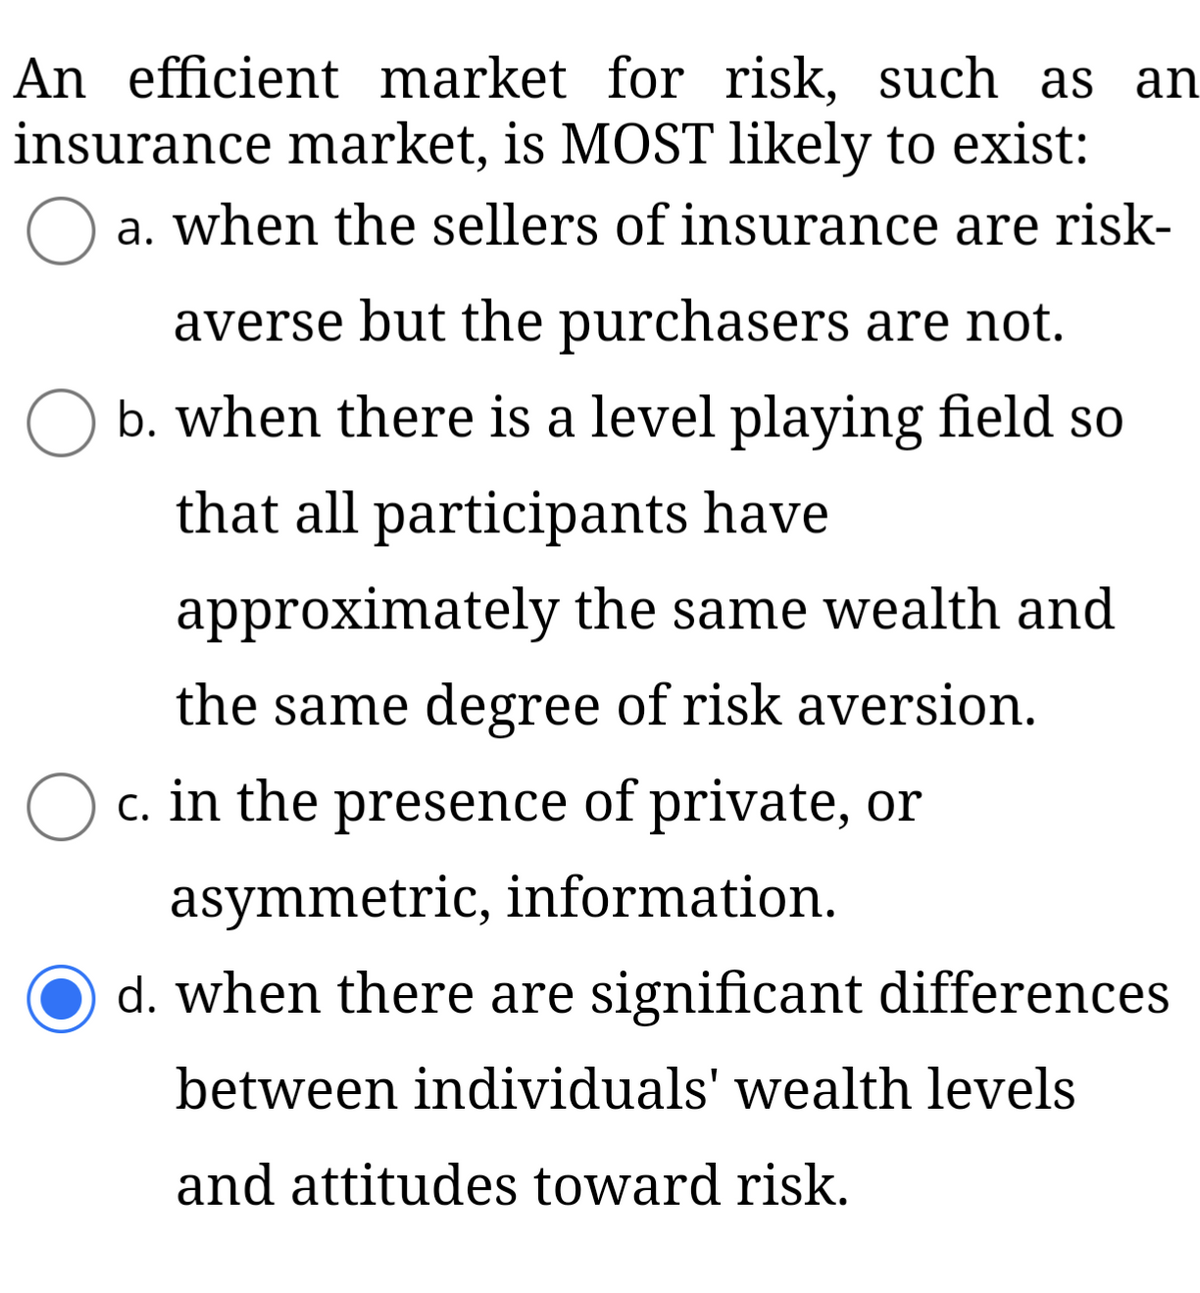 An efficient market for risk, such as an
insurance market, is MOST likely to exist:
a. when the sellers of insurance are risk-
averse but the purchasers are not.
b. when there is a level playing field so
that all participants have
approximately the same wealth and
the same degree of risk aversion.
c. in the presence of private, or
asymmetric, information.
d. when there are significant differences
between individuals' wealth levels
and attitudes toward risk.